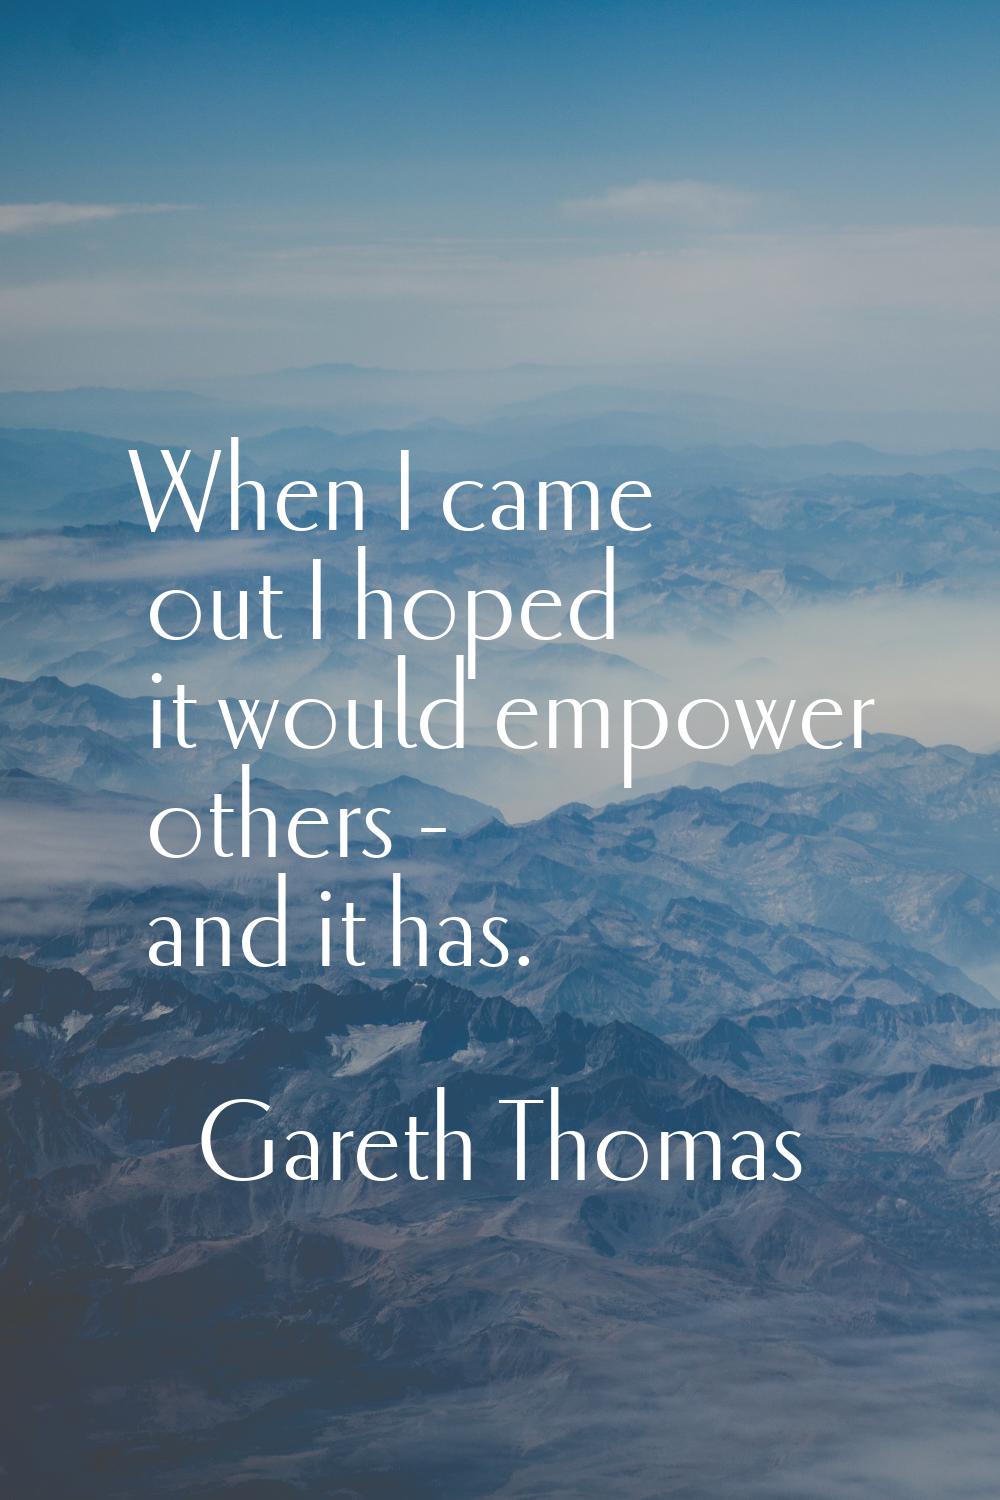 When I came out I hoped it would empower others - and it has.